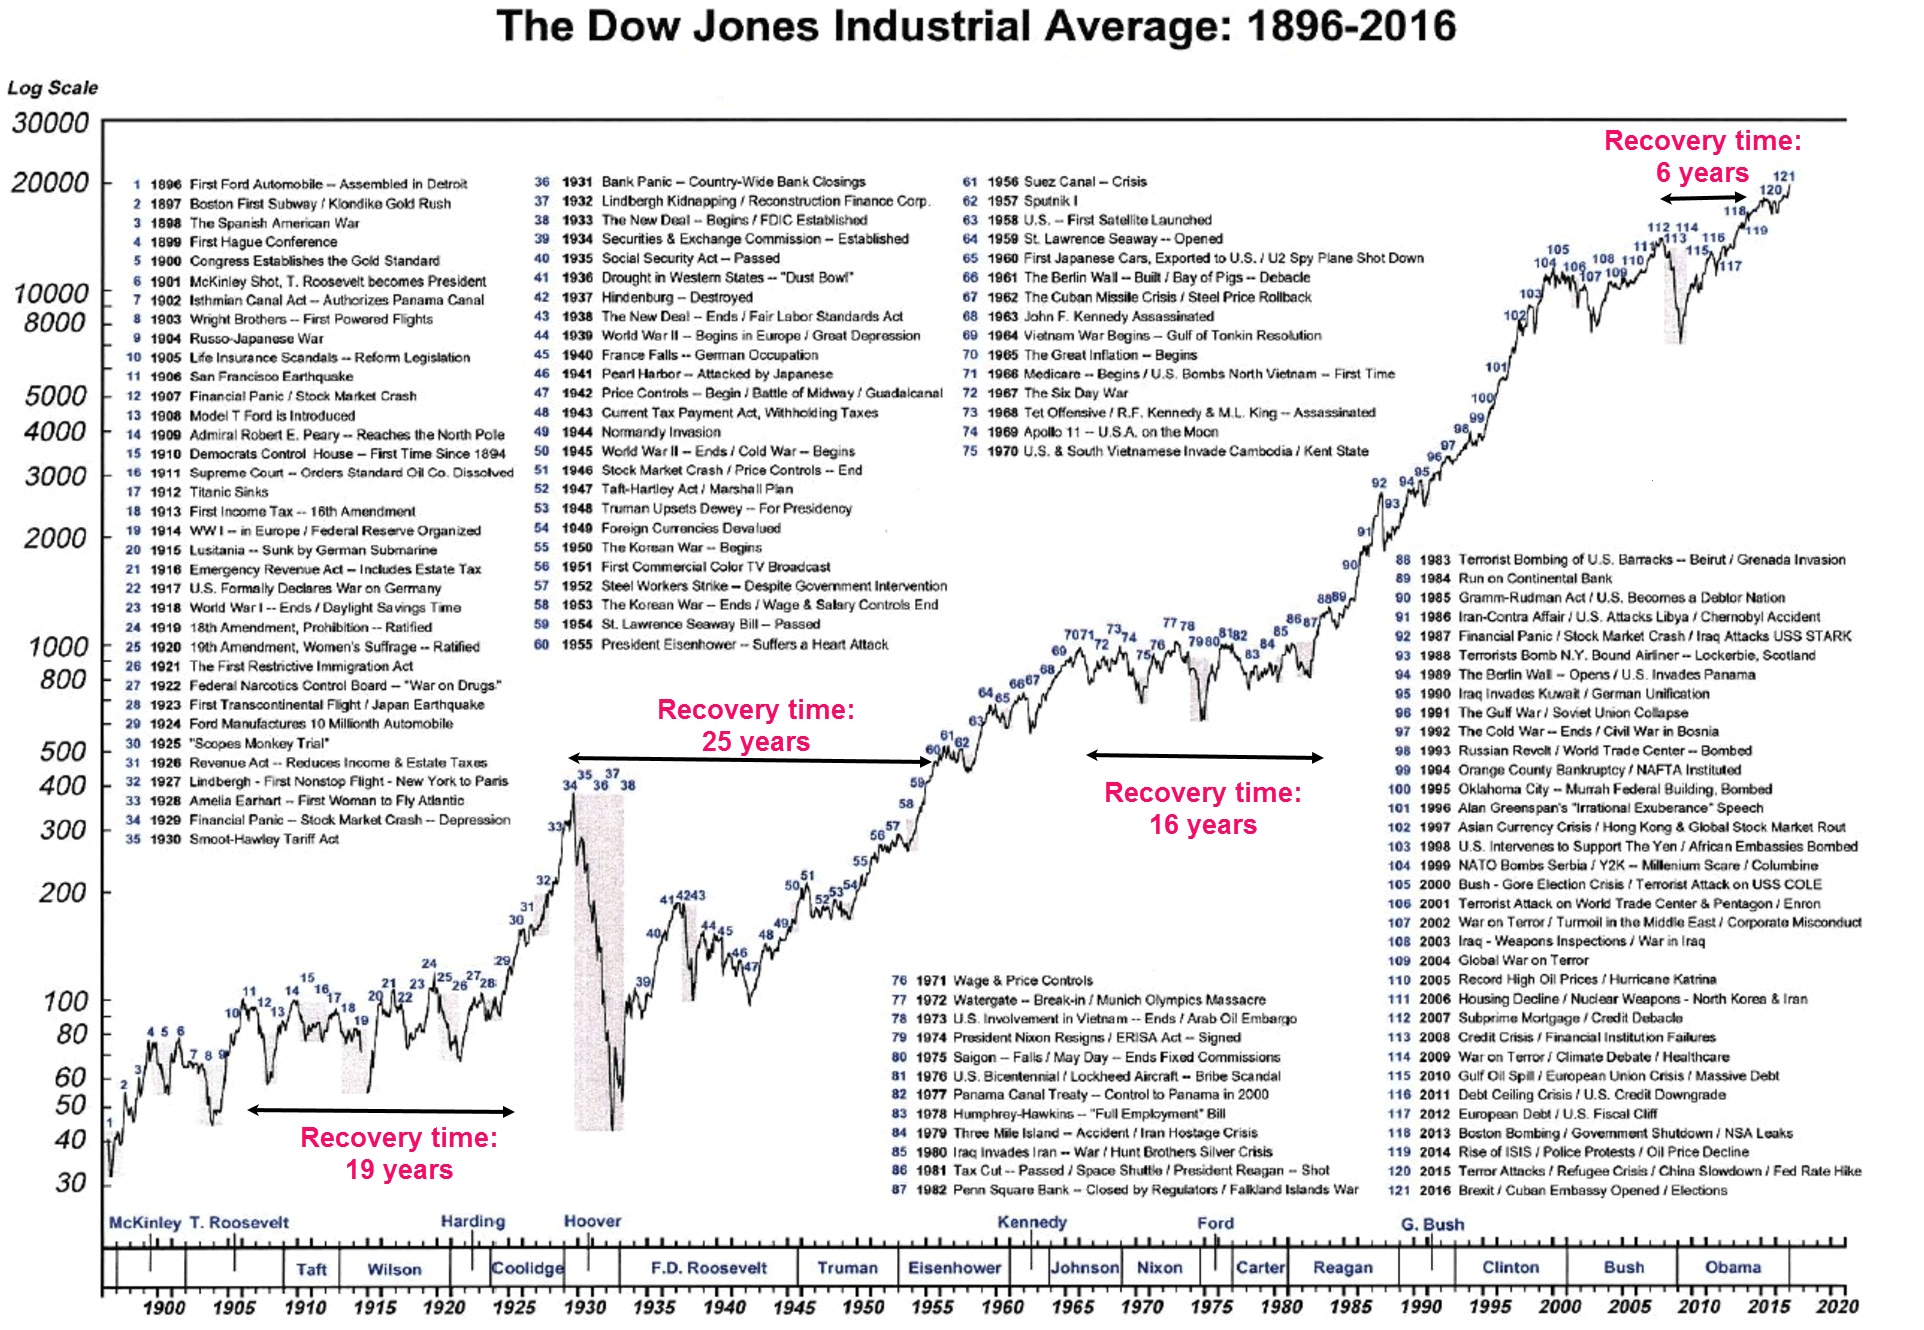 One Chart 120 Years of the Dow Jones Industrial Average Apollo Wealth Management LTD